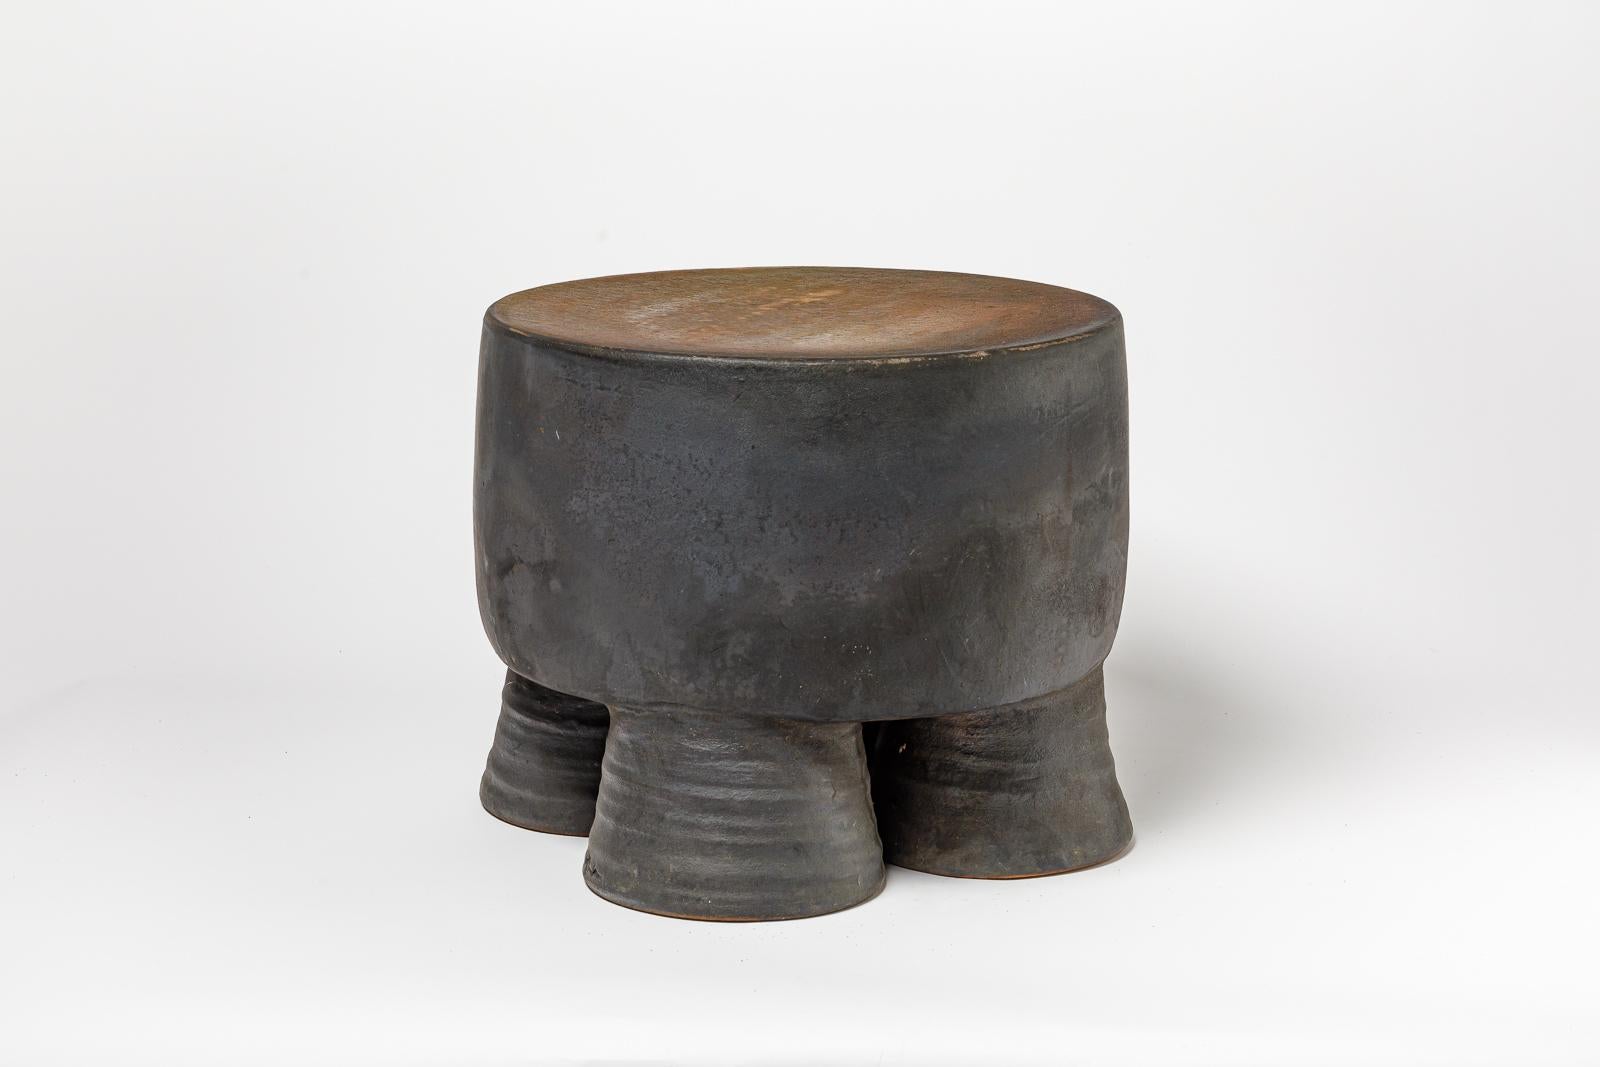 Black and ocher glazed ceramic stool or coffee table by Mia Jensen. 
Artist signature under the base. 2023.
H : 14.3’ x 16.5’ inches.